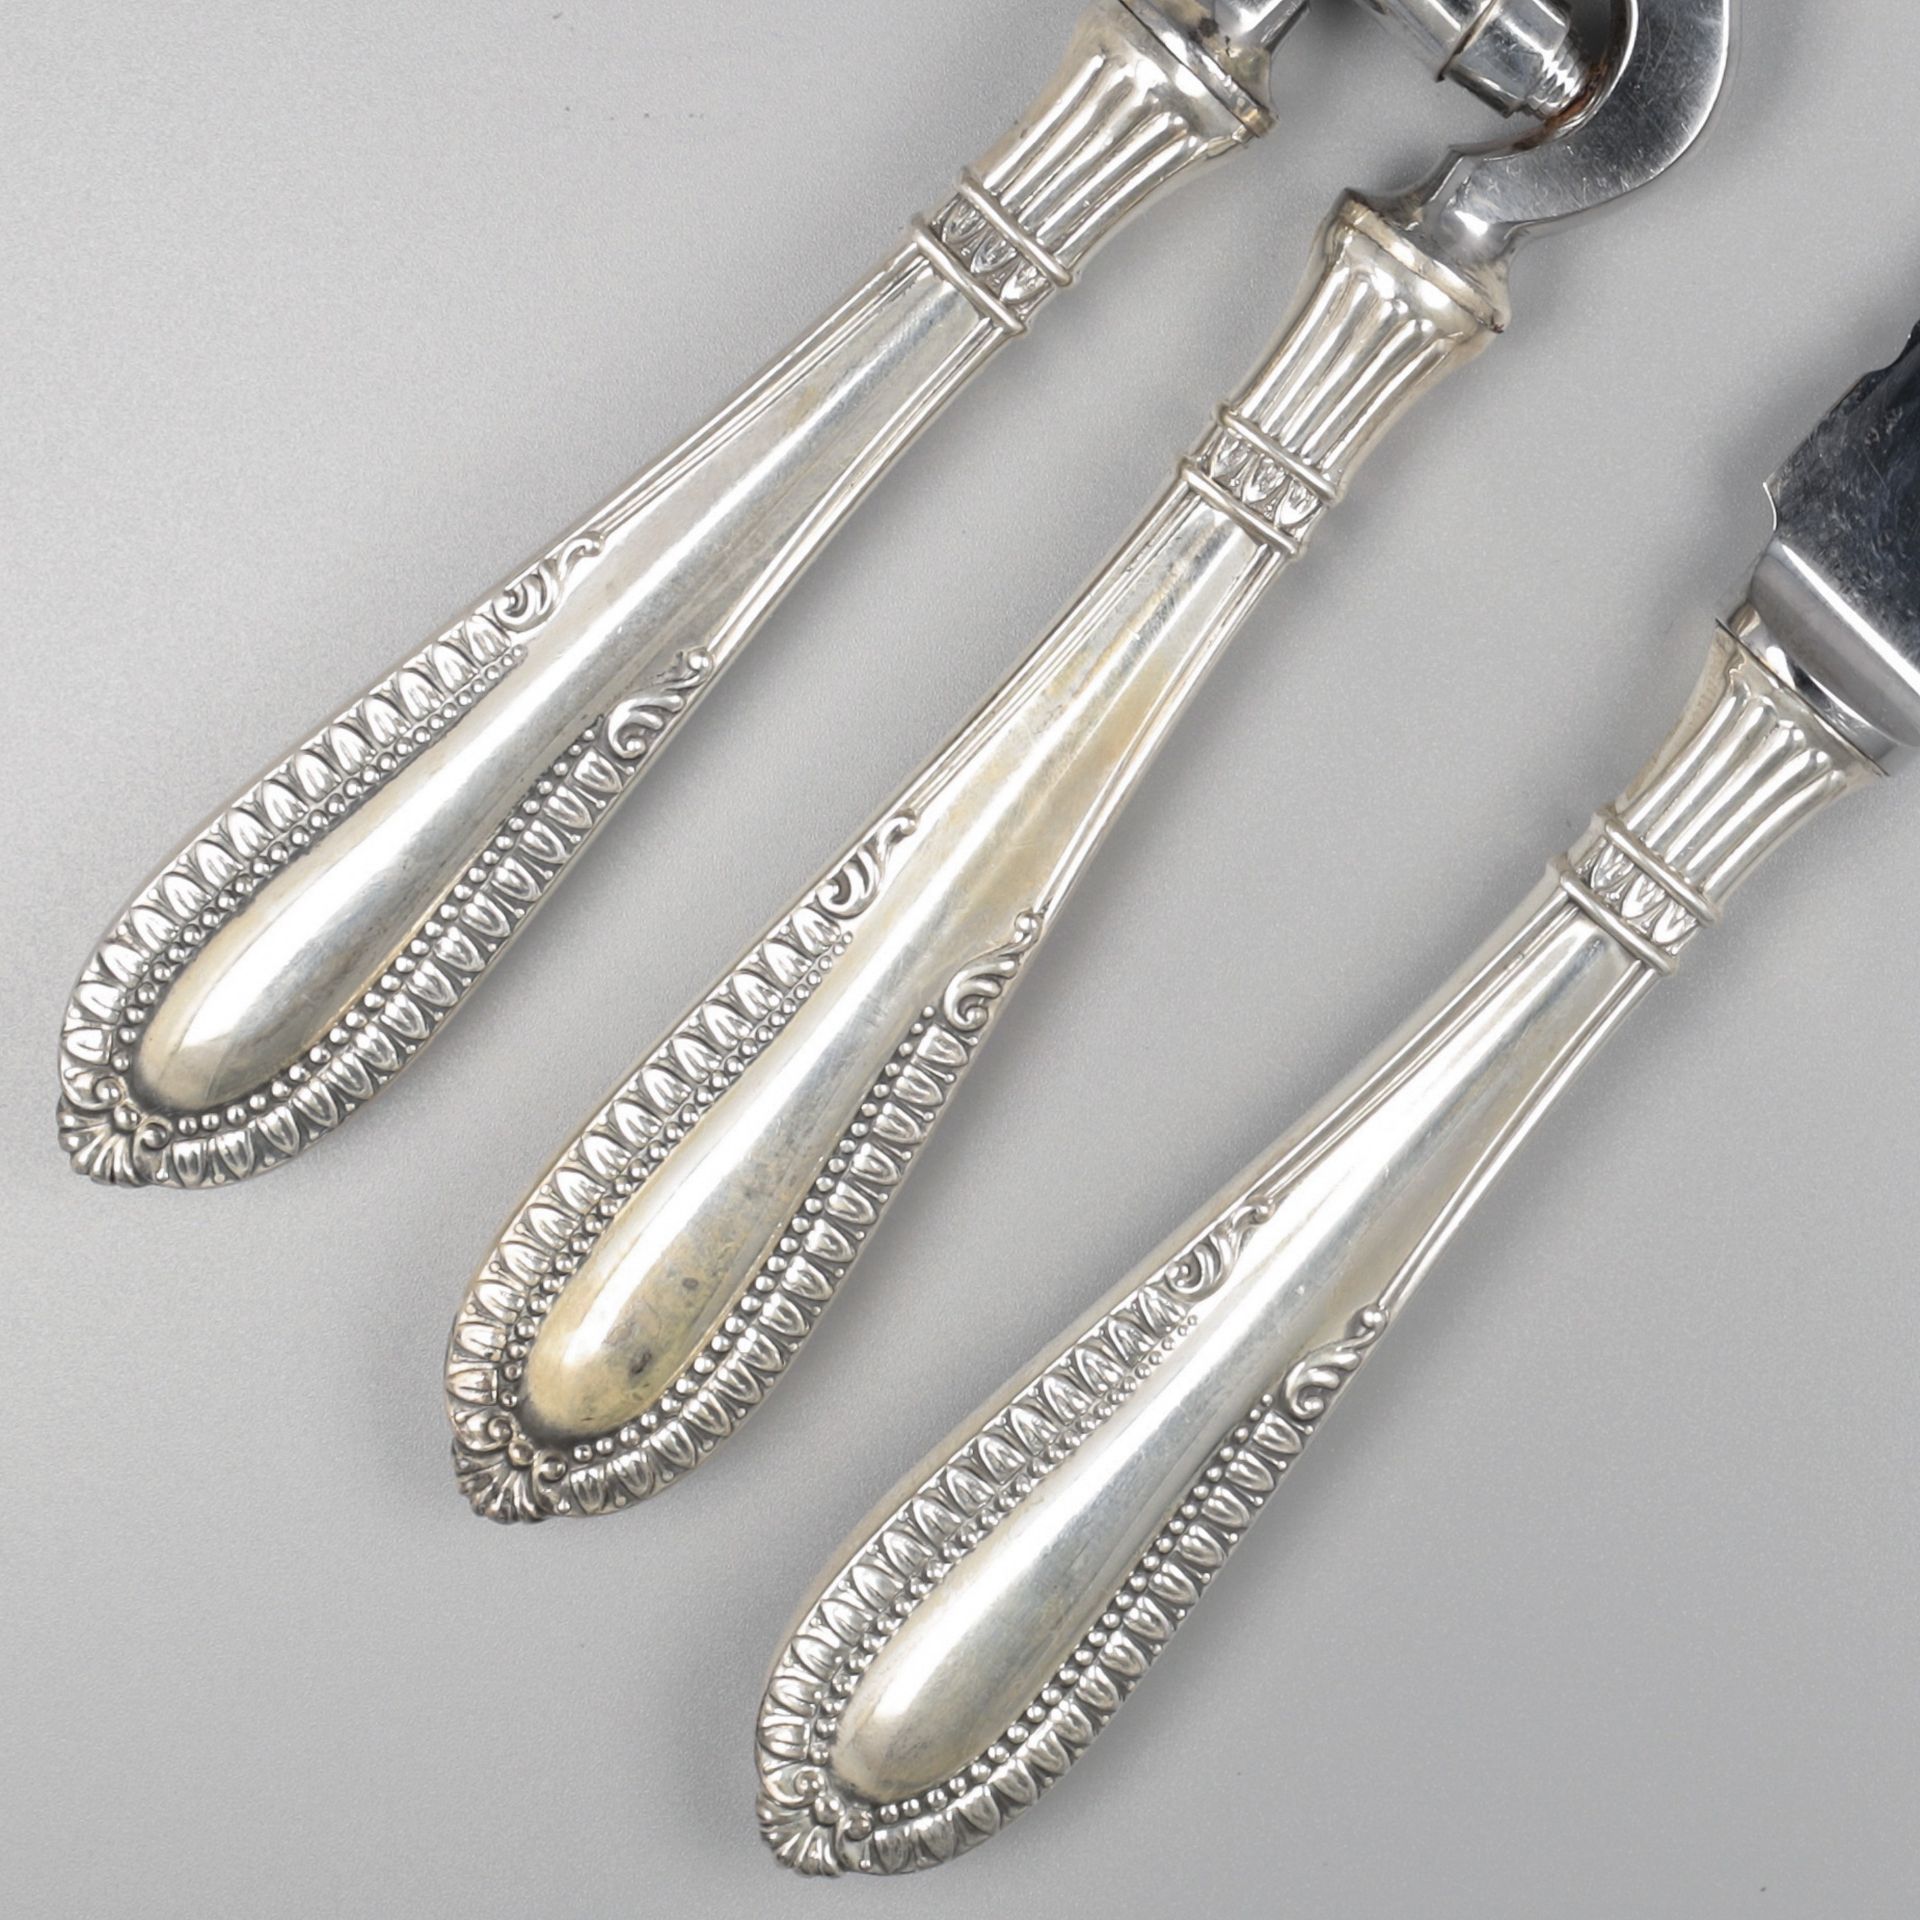 No reserve - Bread knife and game shears, model Grand Paris, silver. - Image 4 of 7